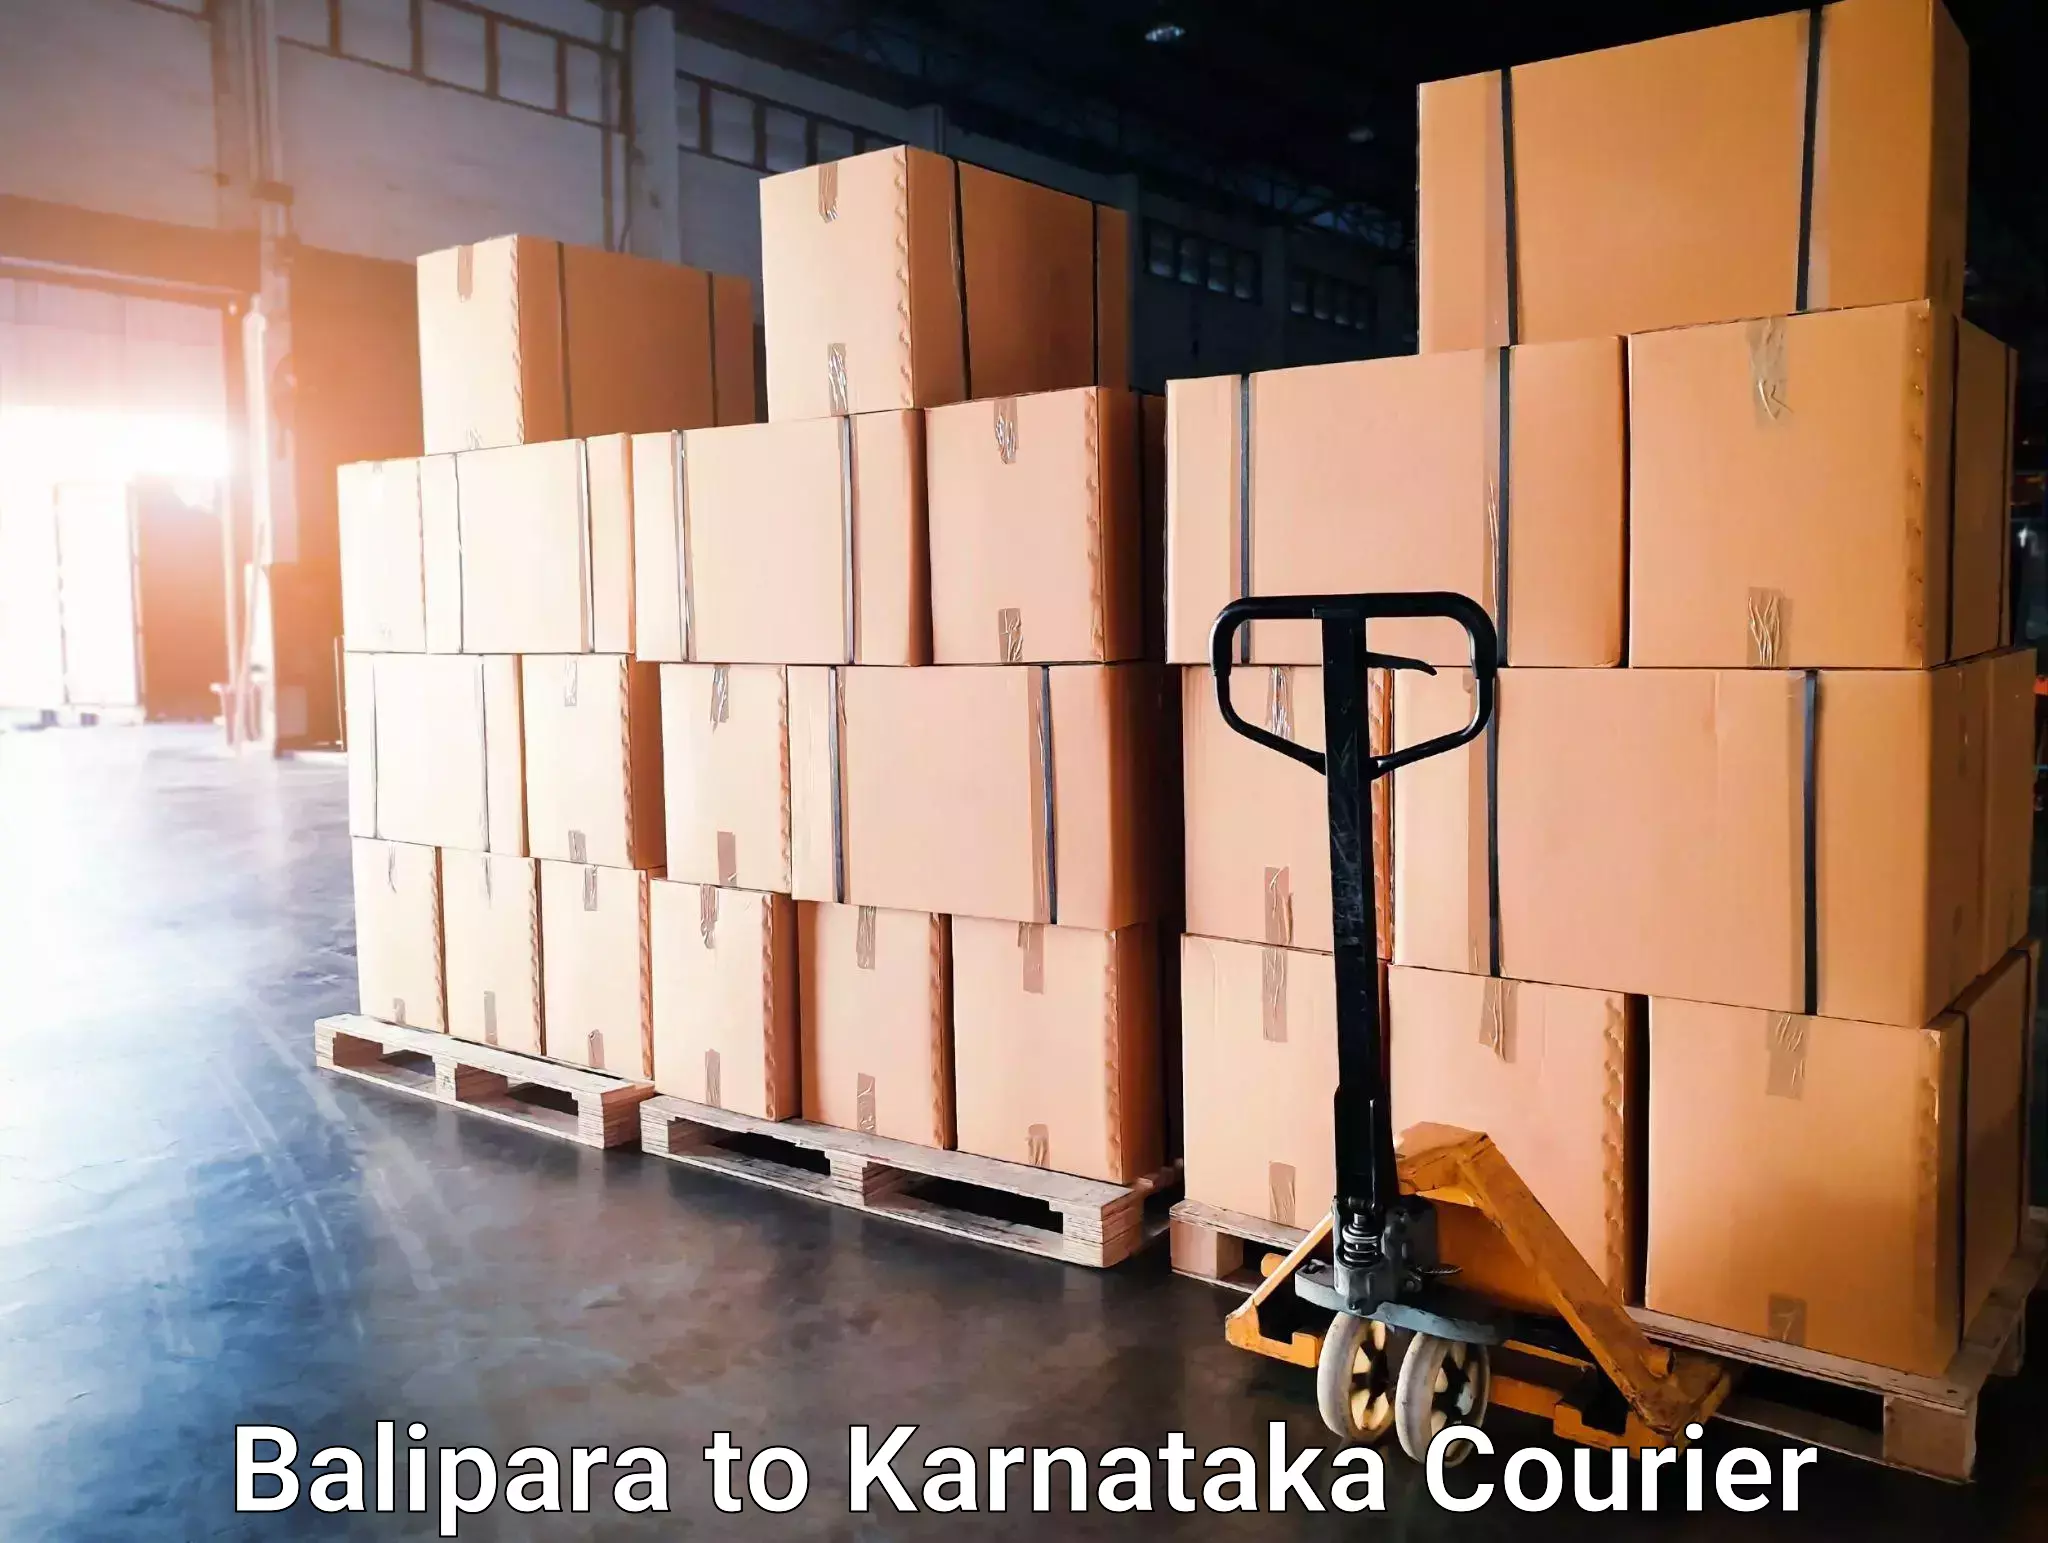 Express delivery network Balipara to Pedapudi